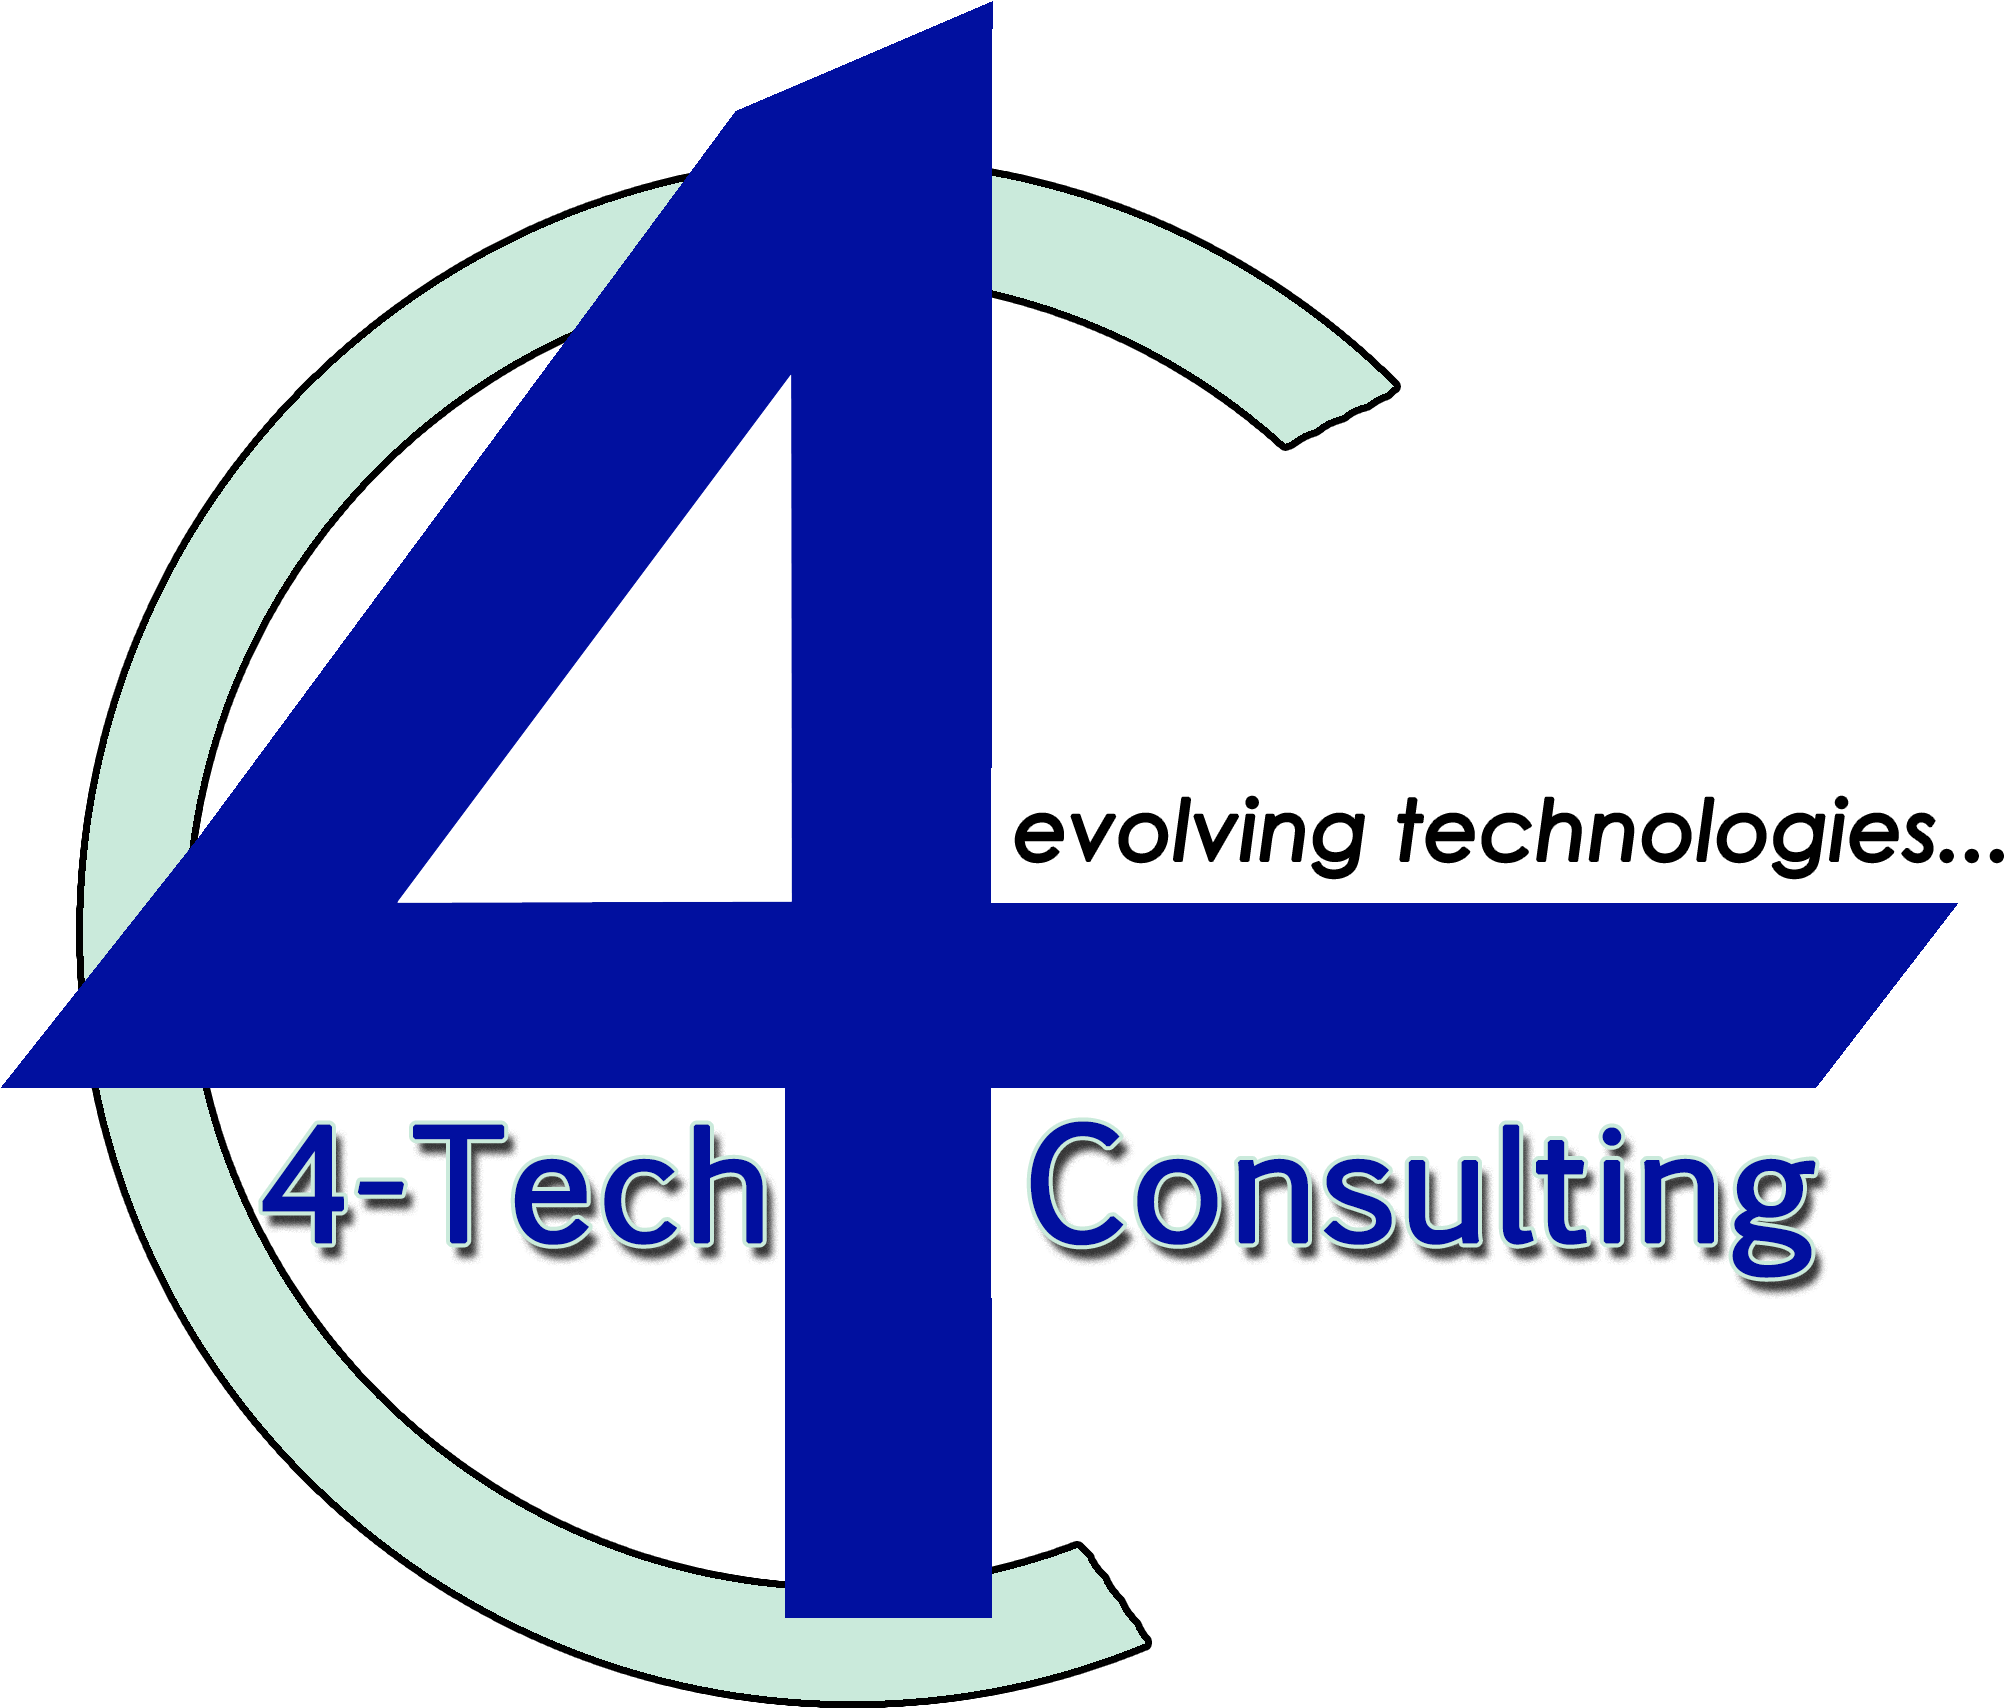 4 Tech Consulting 4techconsulting Twitter - Cross (2100x2100)